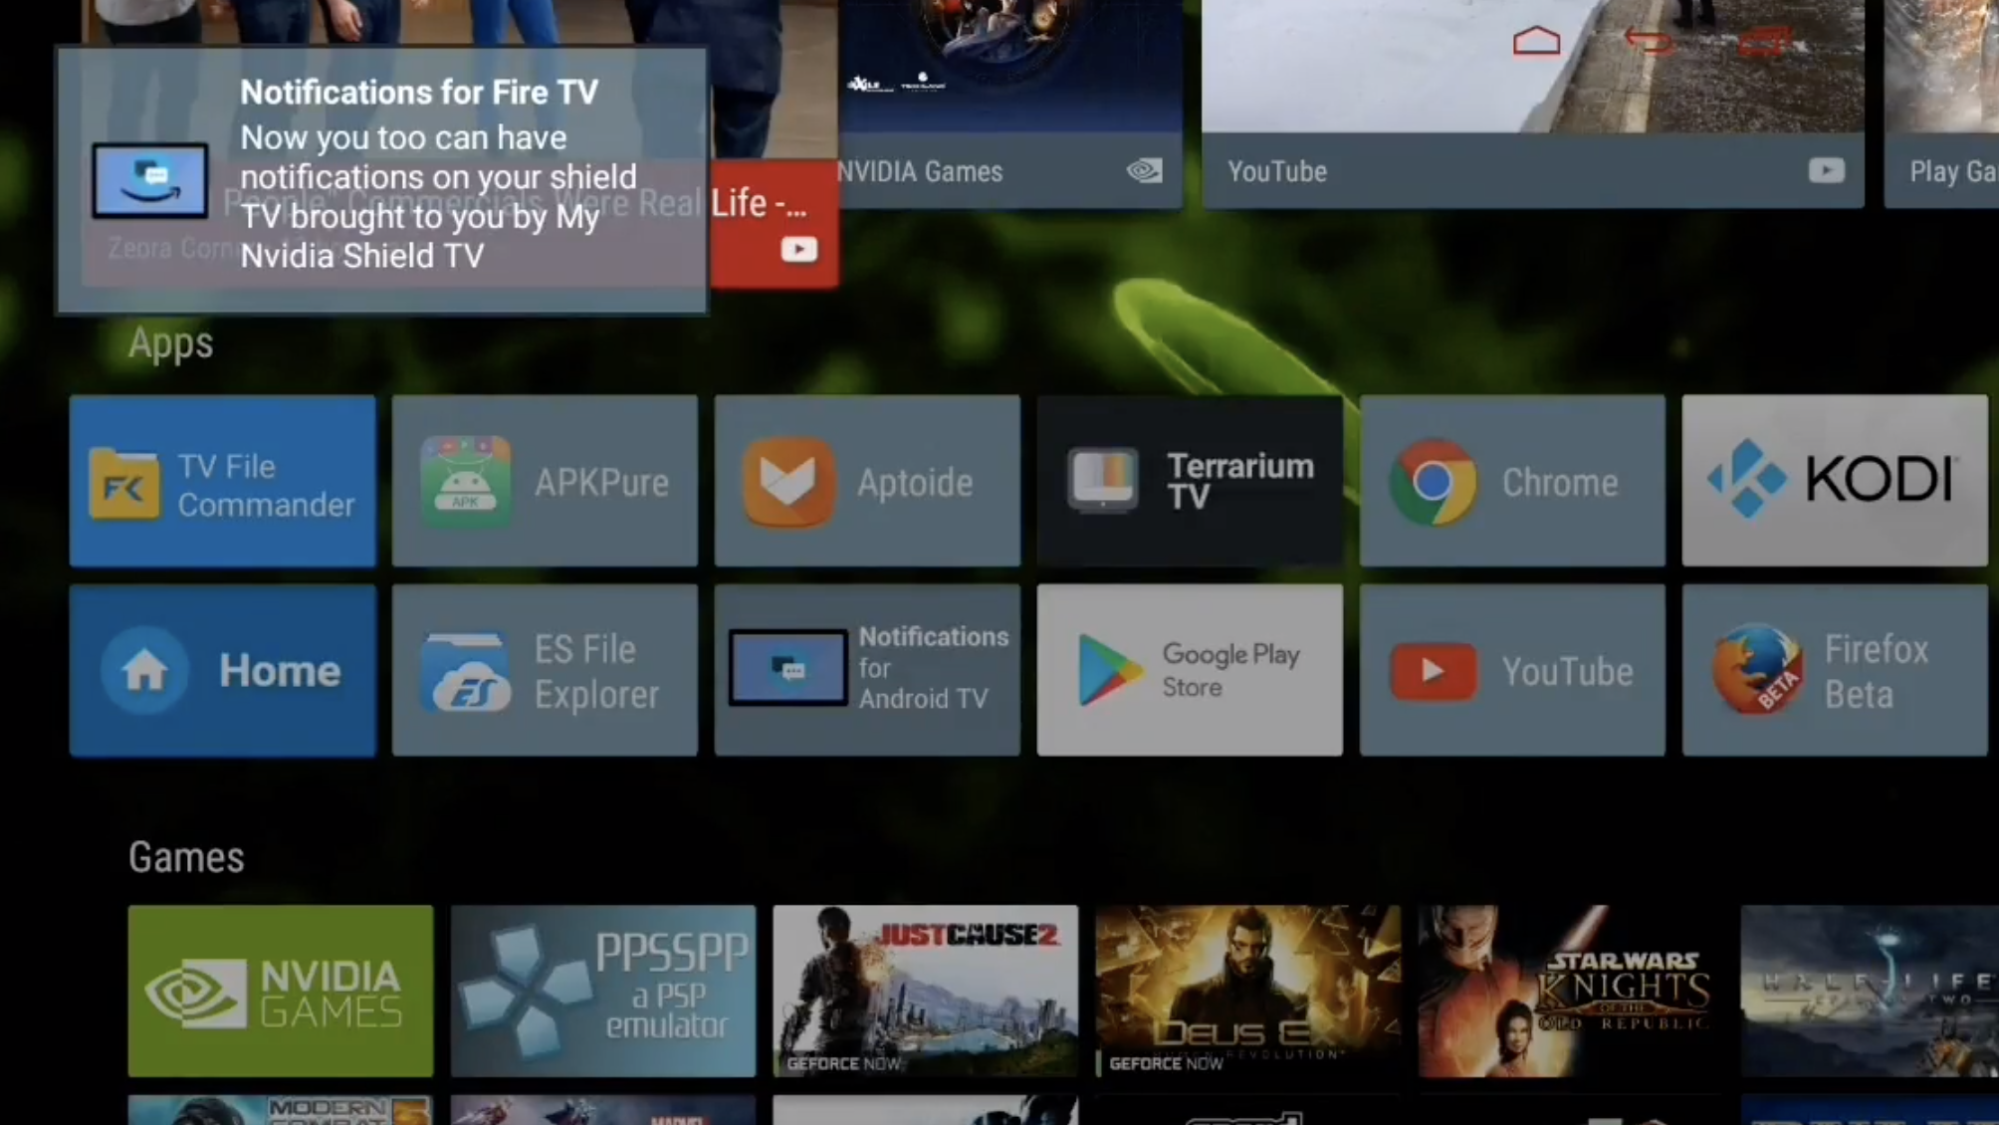 An Android TV displaying a push notification in the upper left corner of the screen.